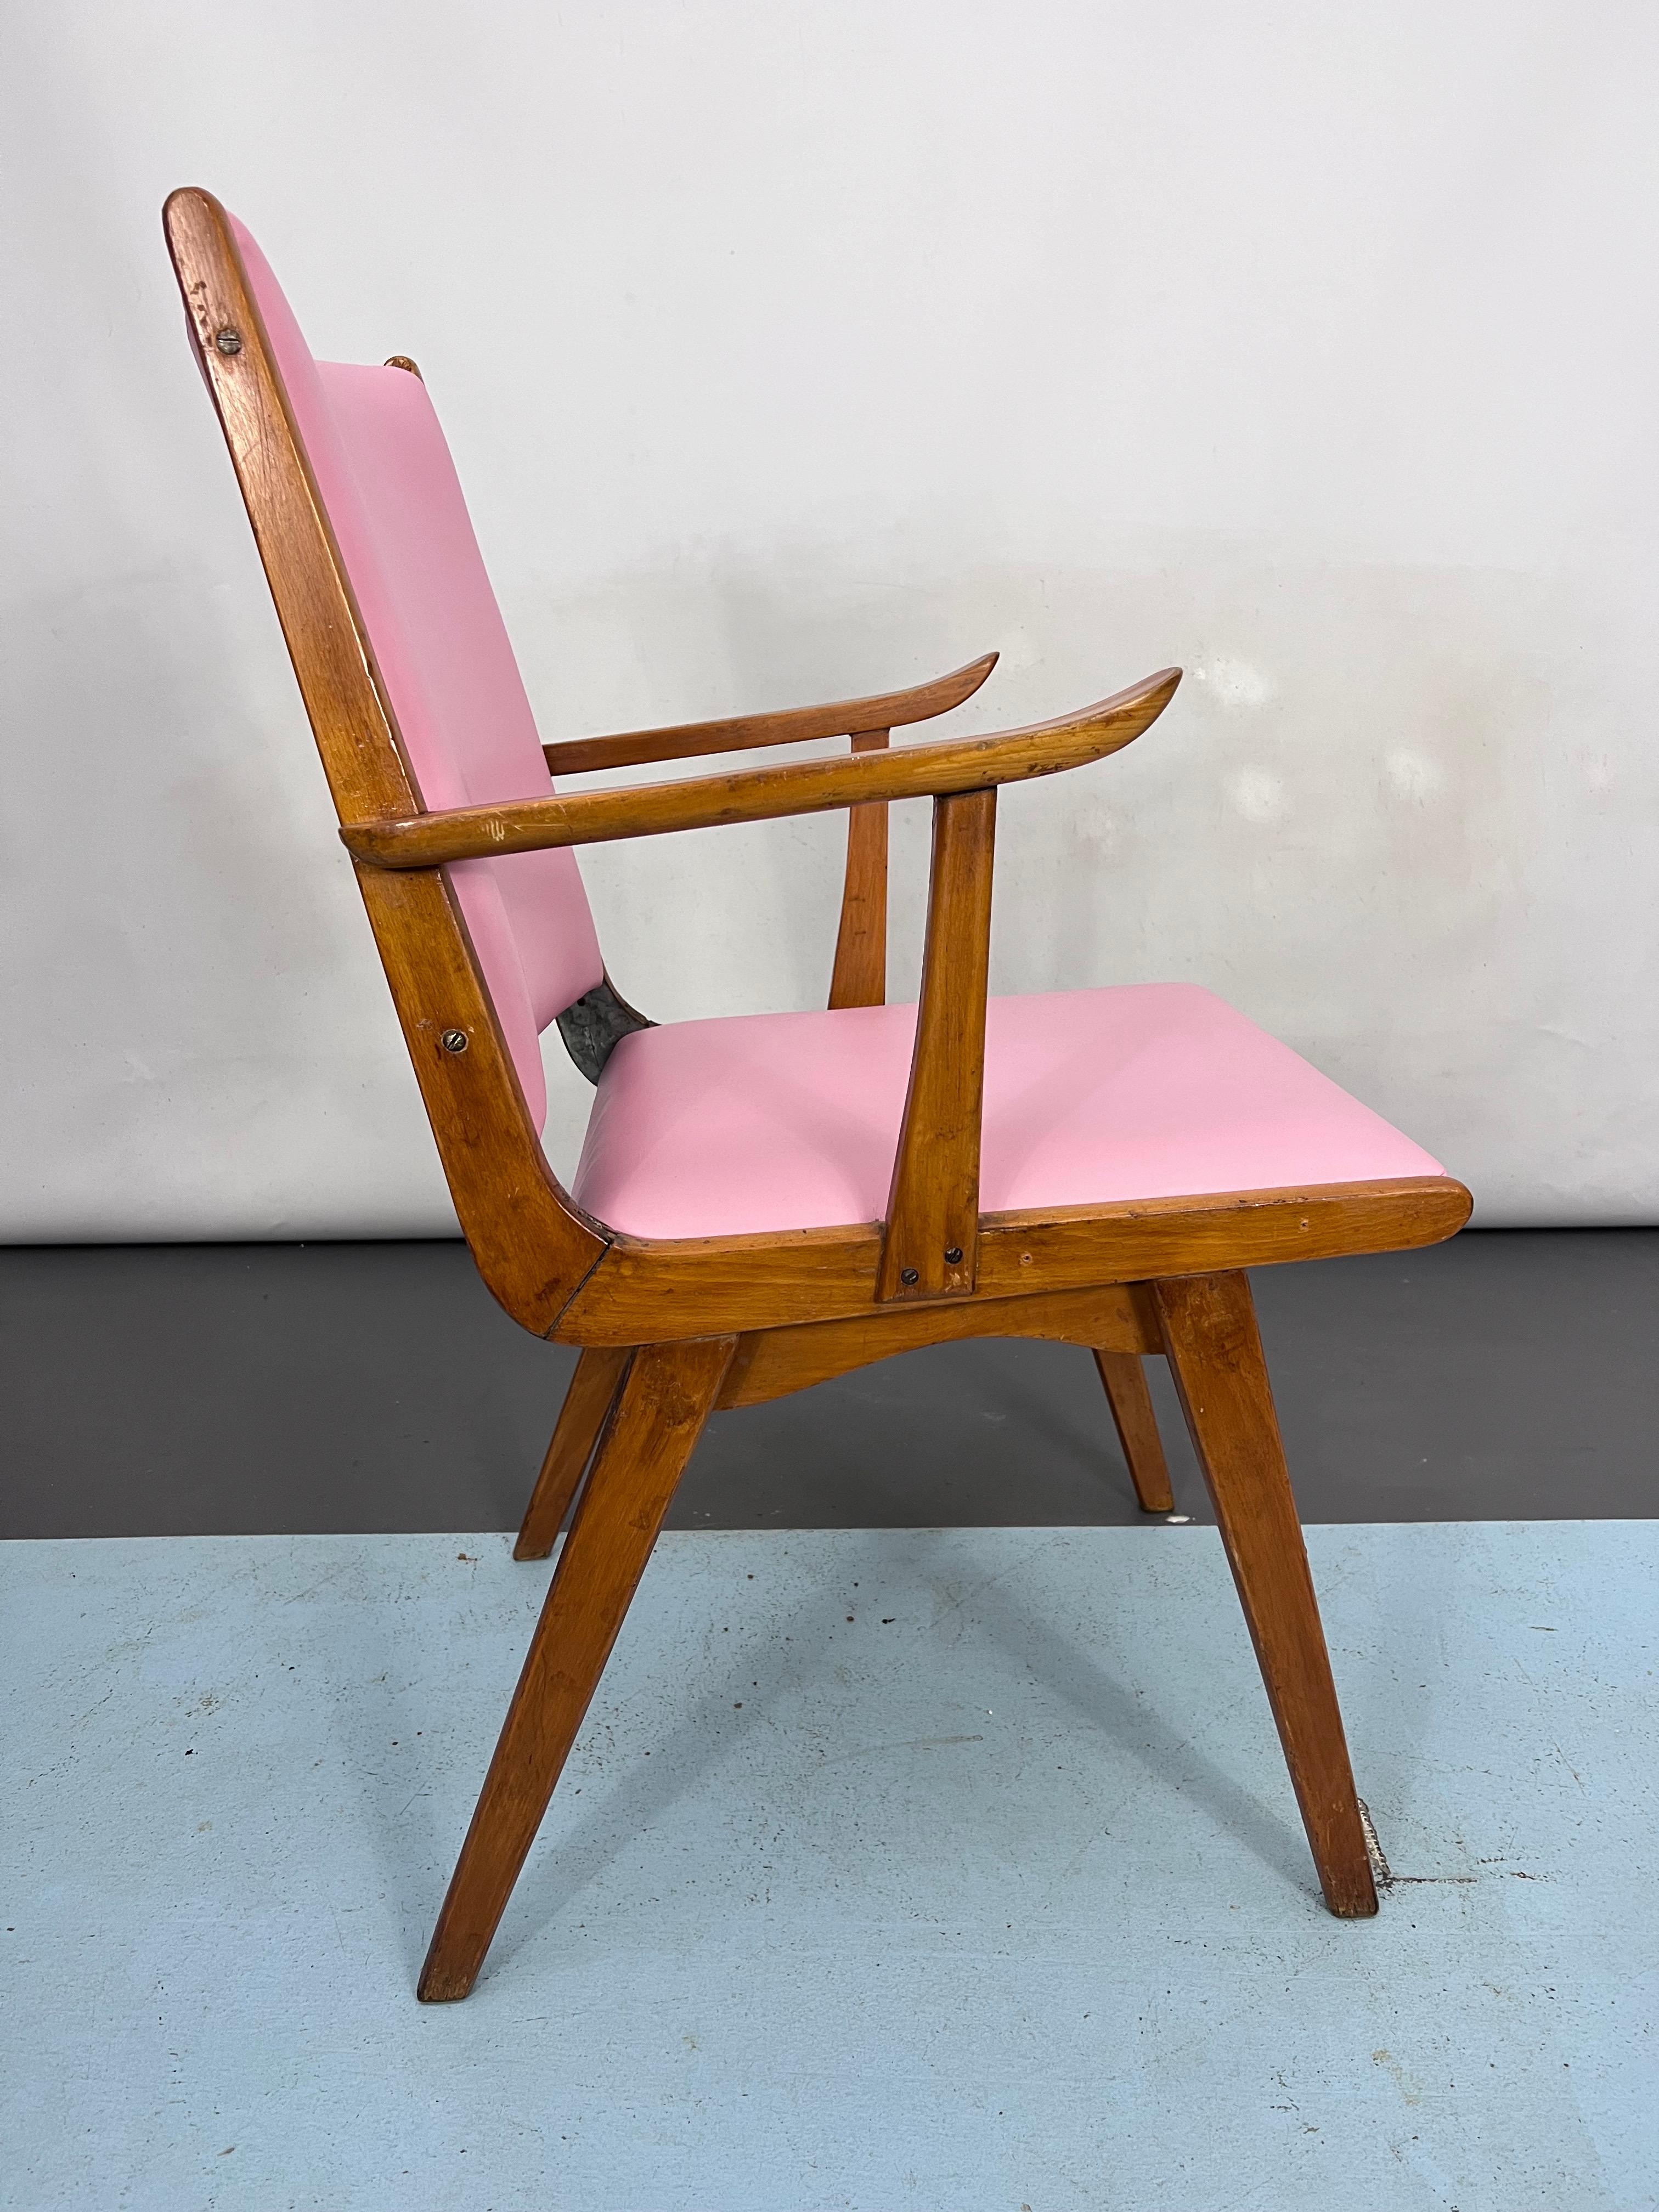 Vintage Italian Wood Accent Chair in Pink Leatherette, Italy, 1950s For Sale 5